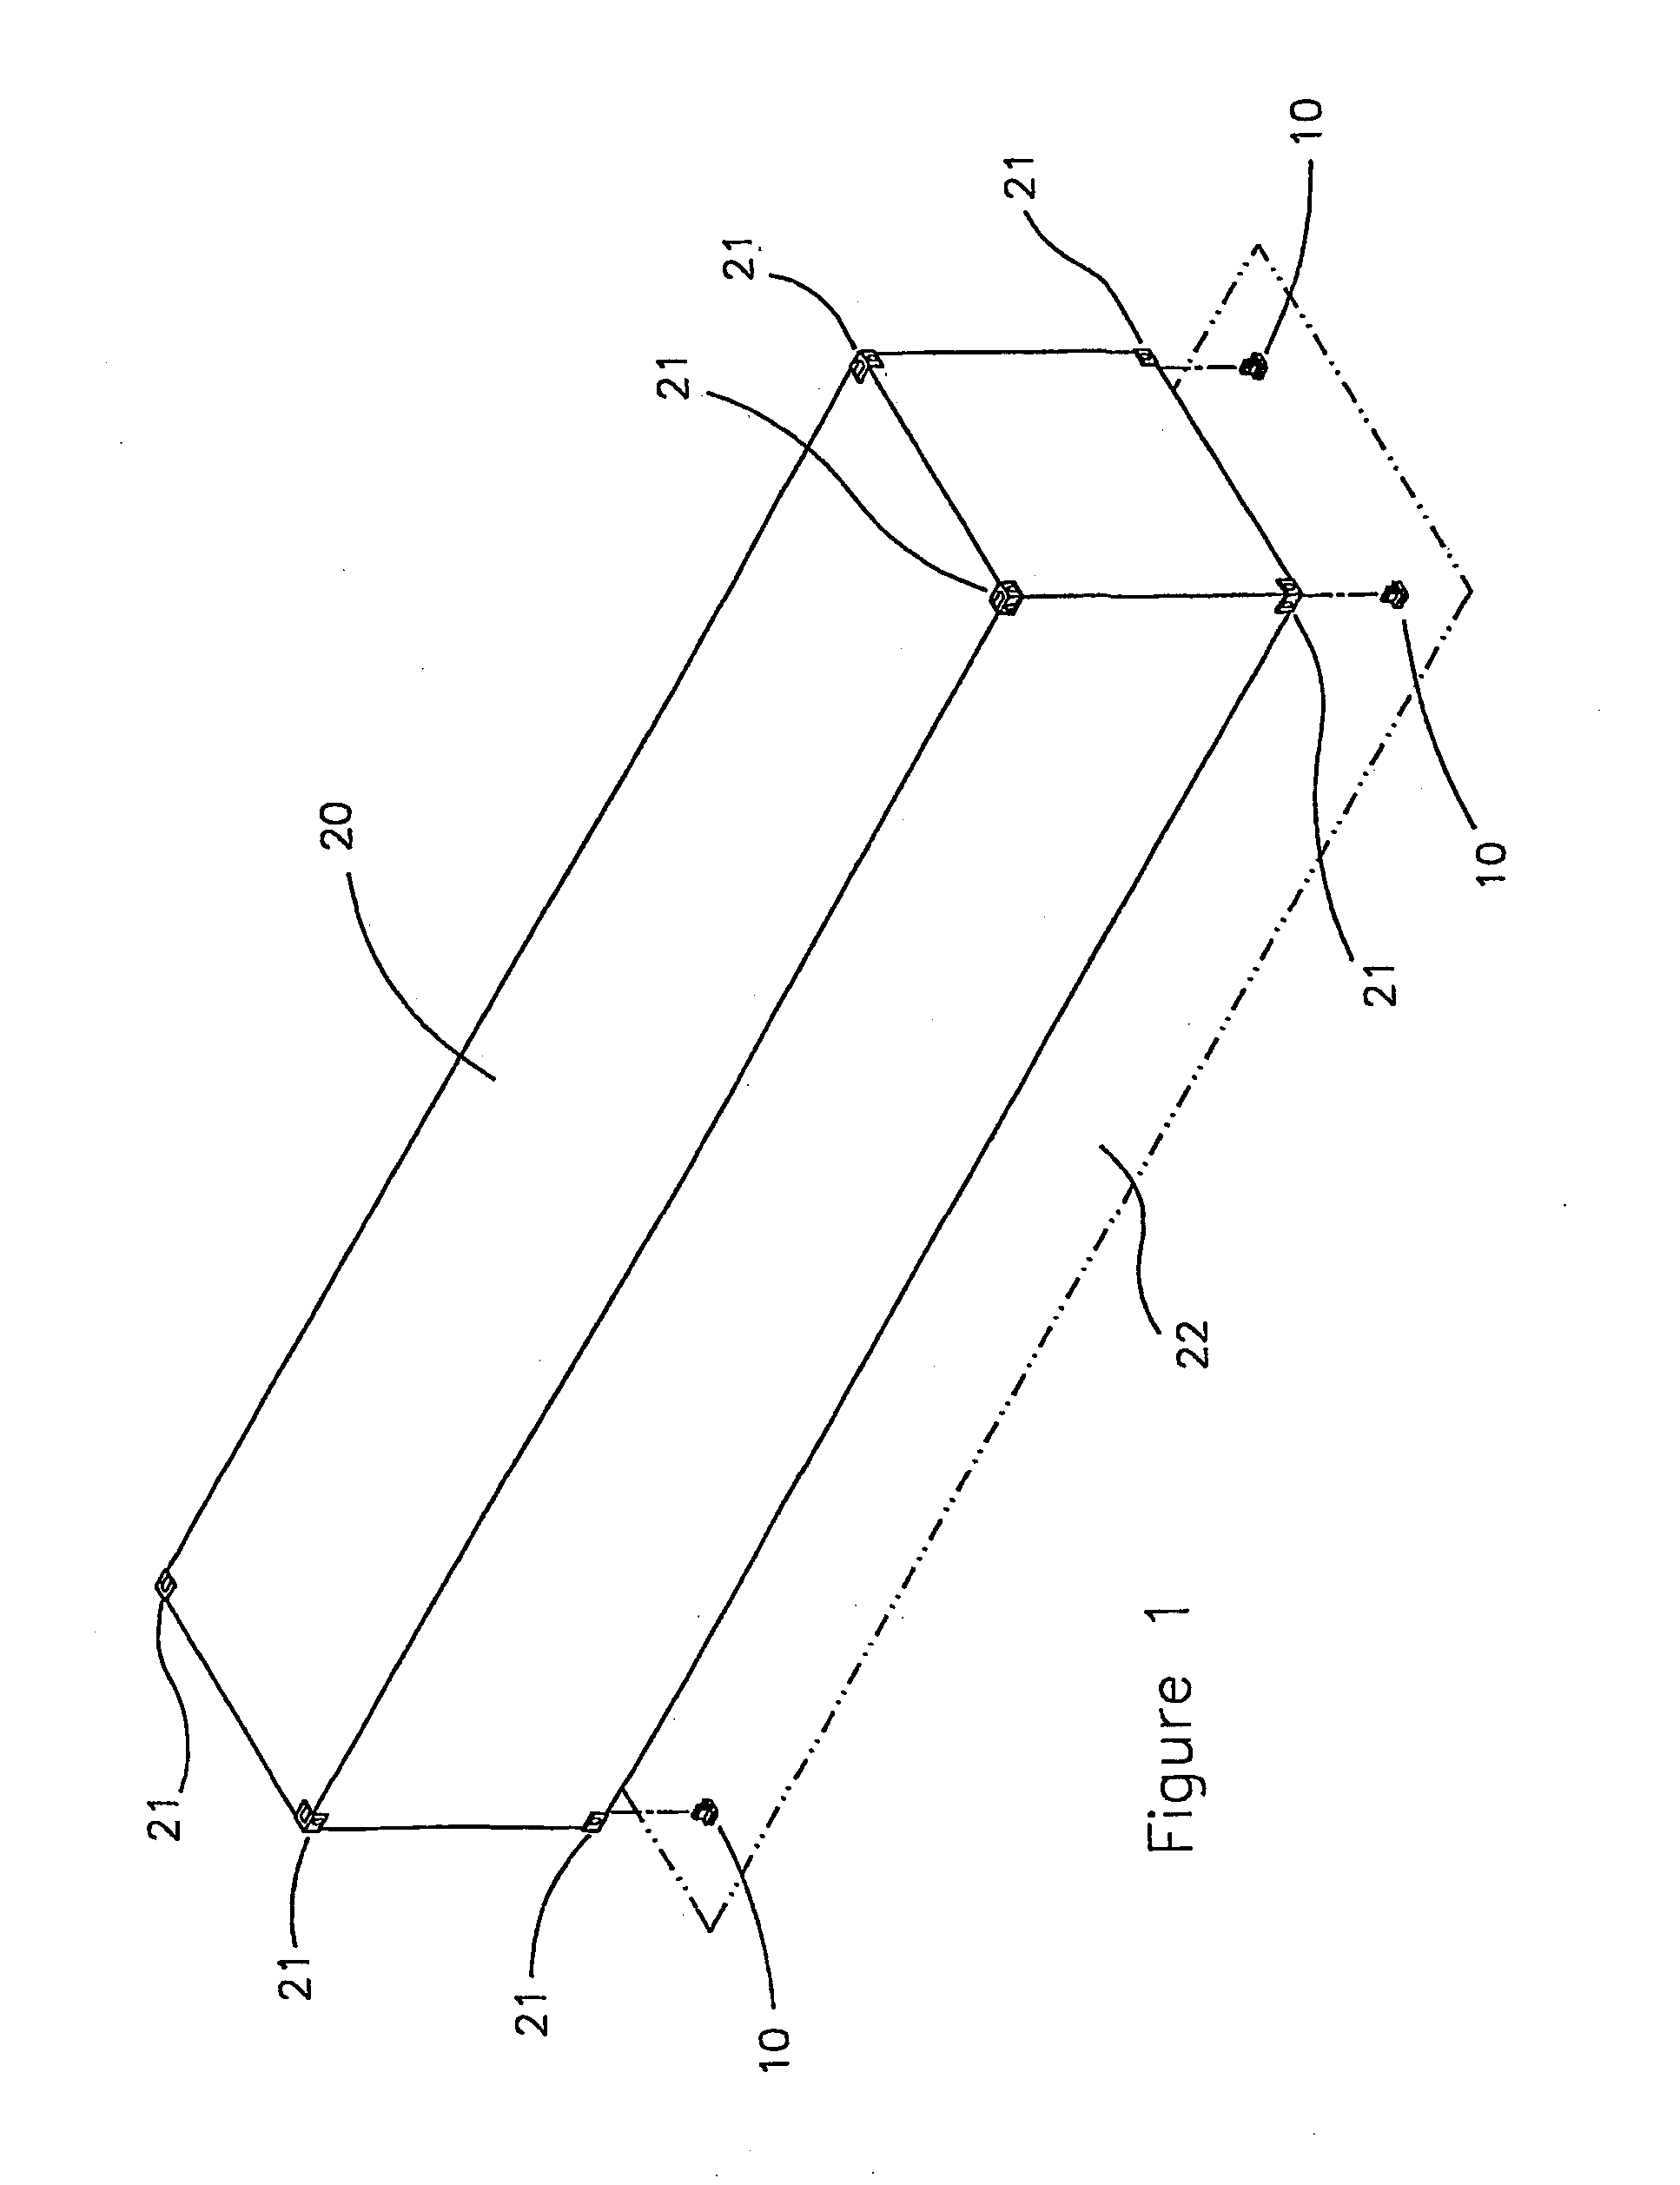 Latch device for securing cargo containers together and/or to vehicle decks